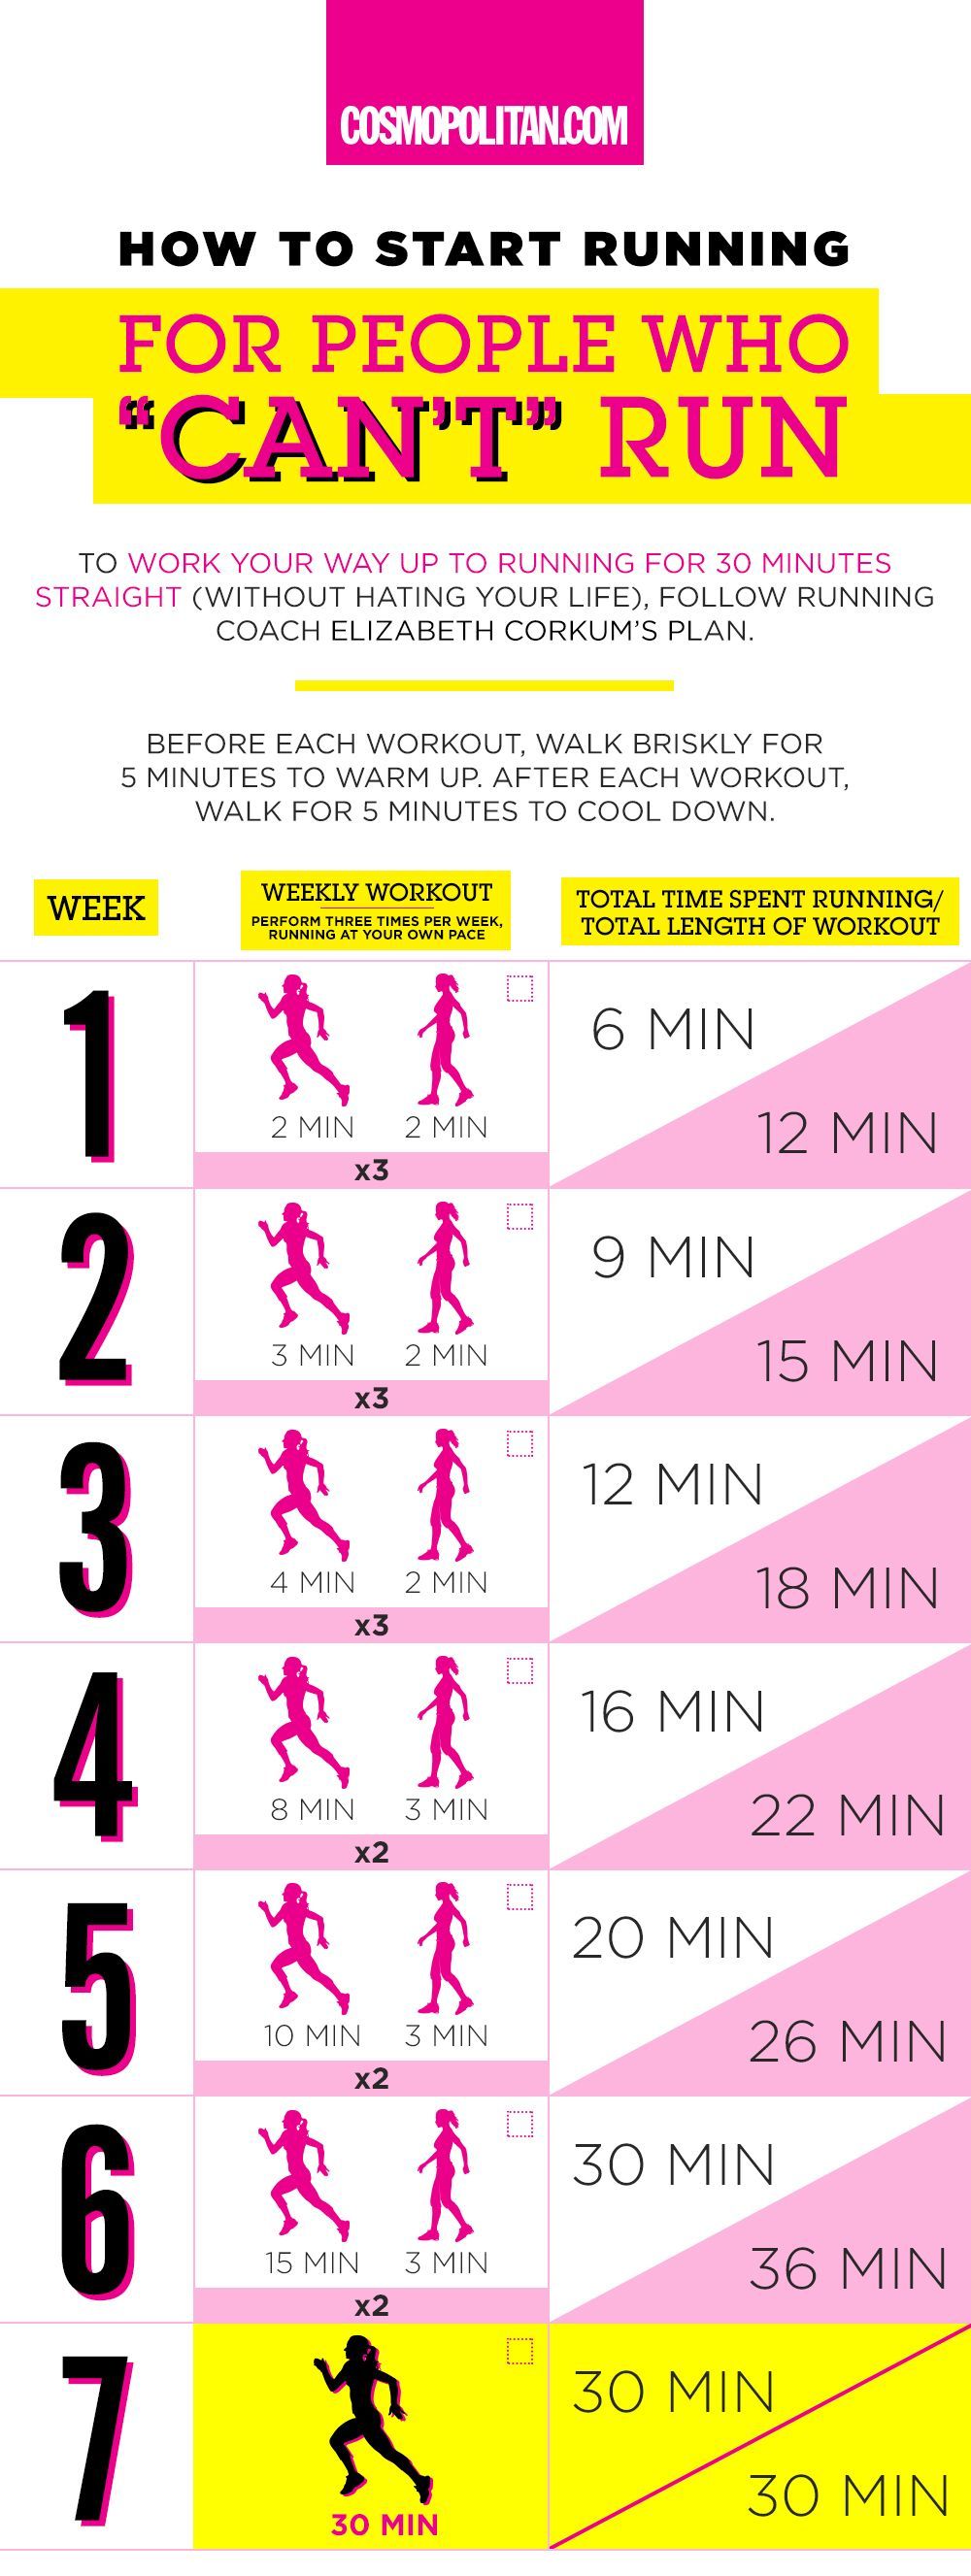 HOW TO START RUNNING: This beginners guide to running is perfect for people who want the benefits of running — strong muscles, a